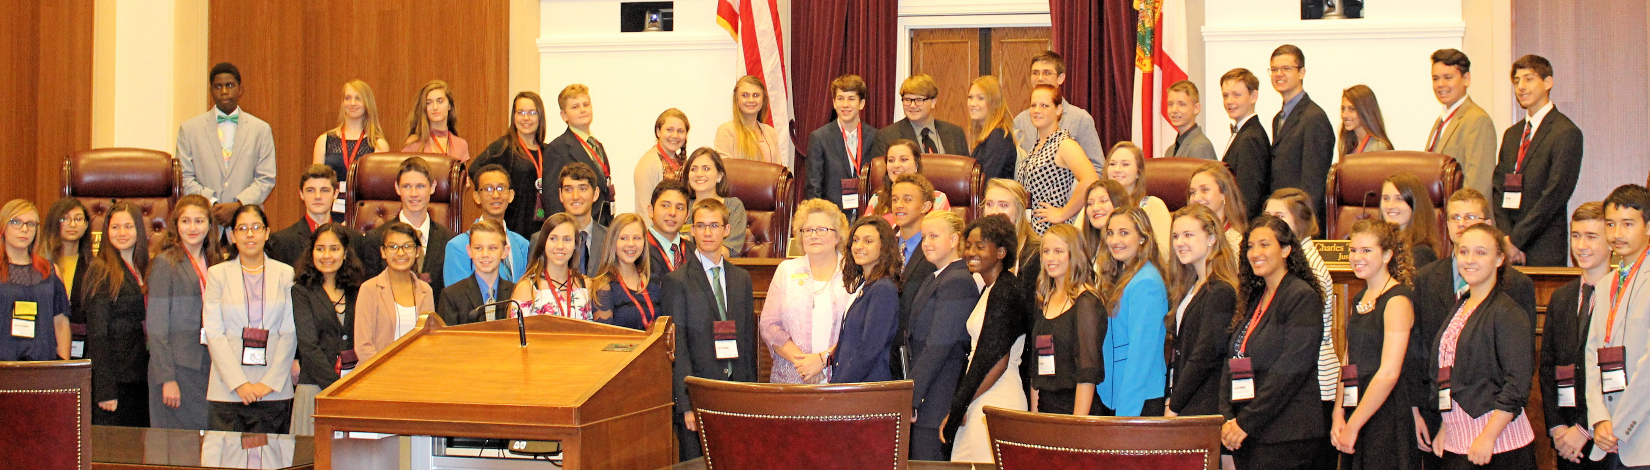 4-H youth at the Florida Supreme Court